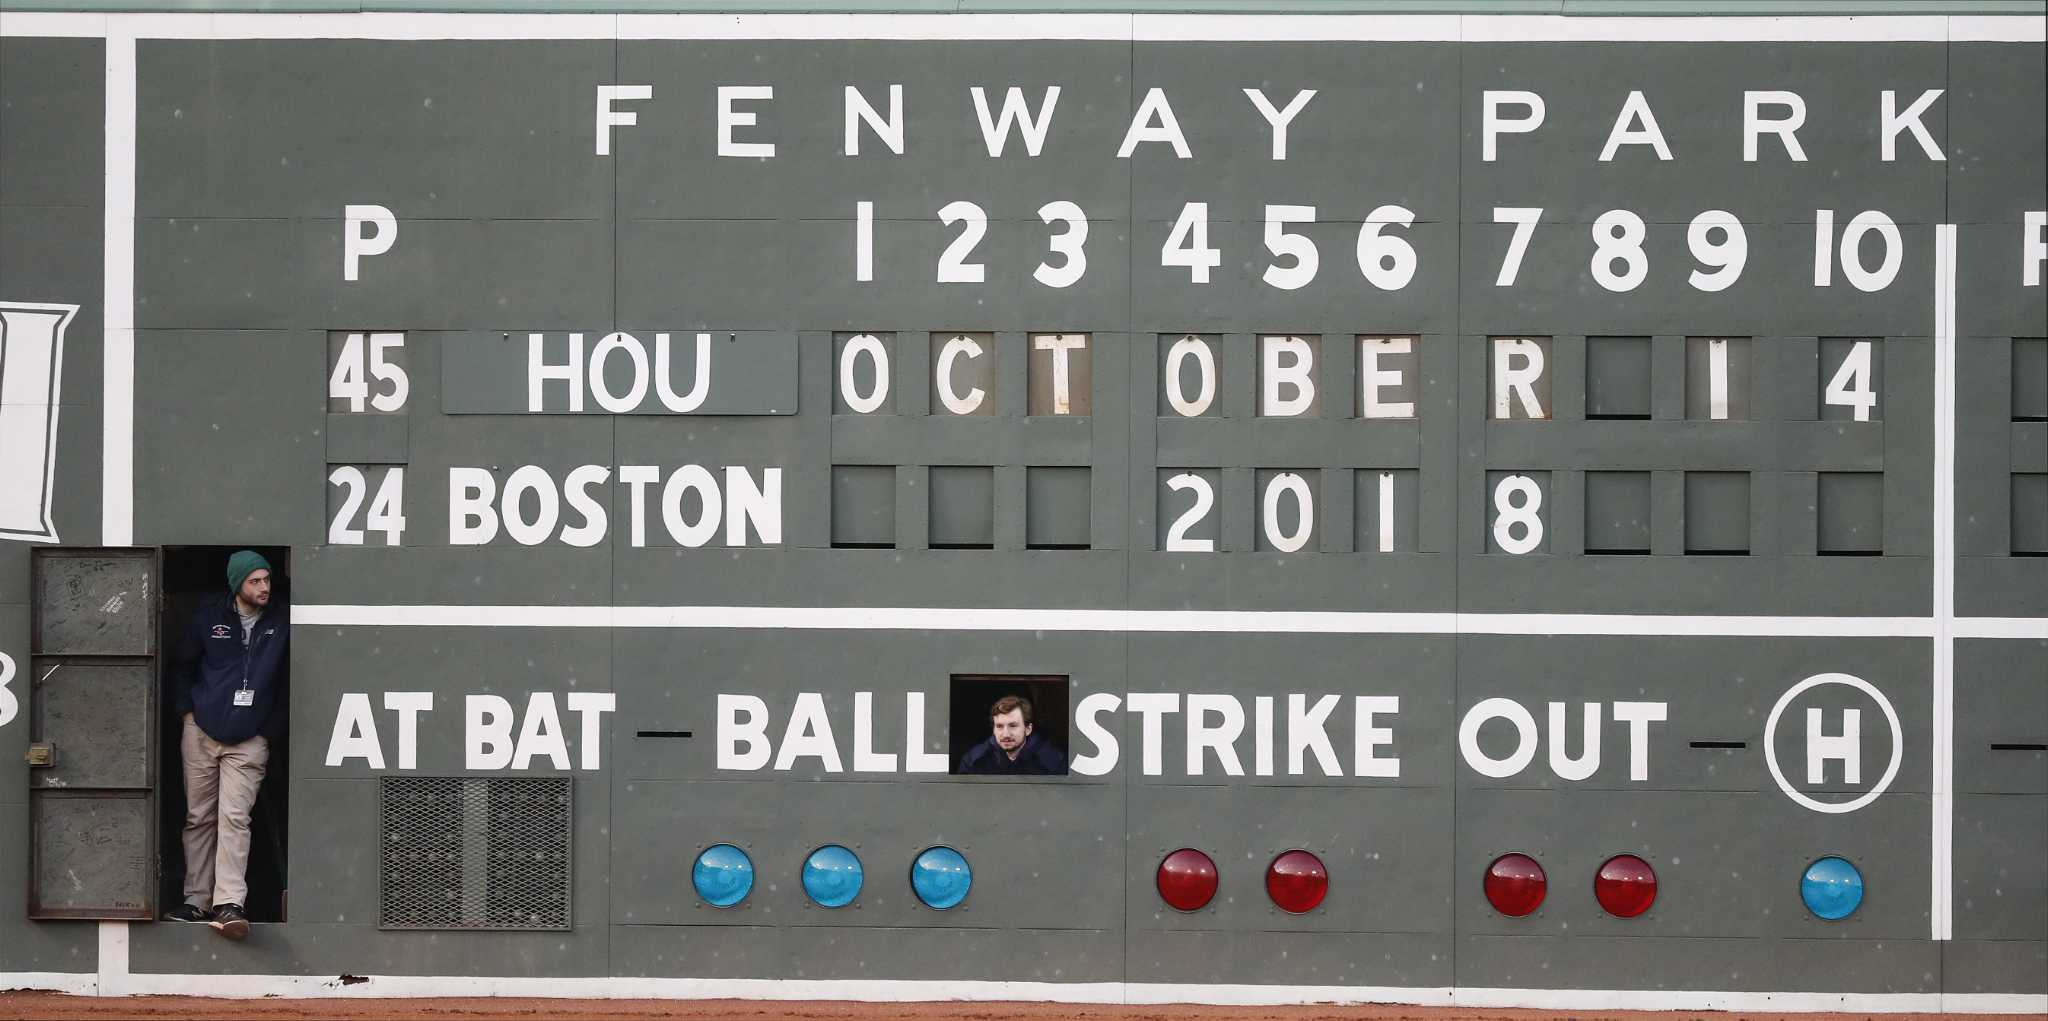 Here's What It Takes To Be Fenway Park Scoreboard Operator